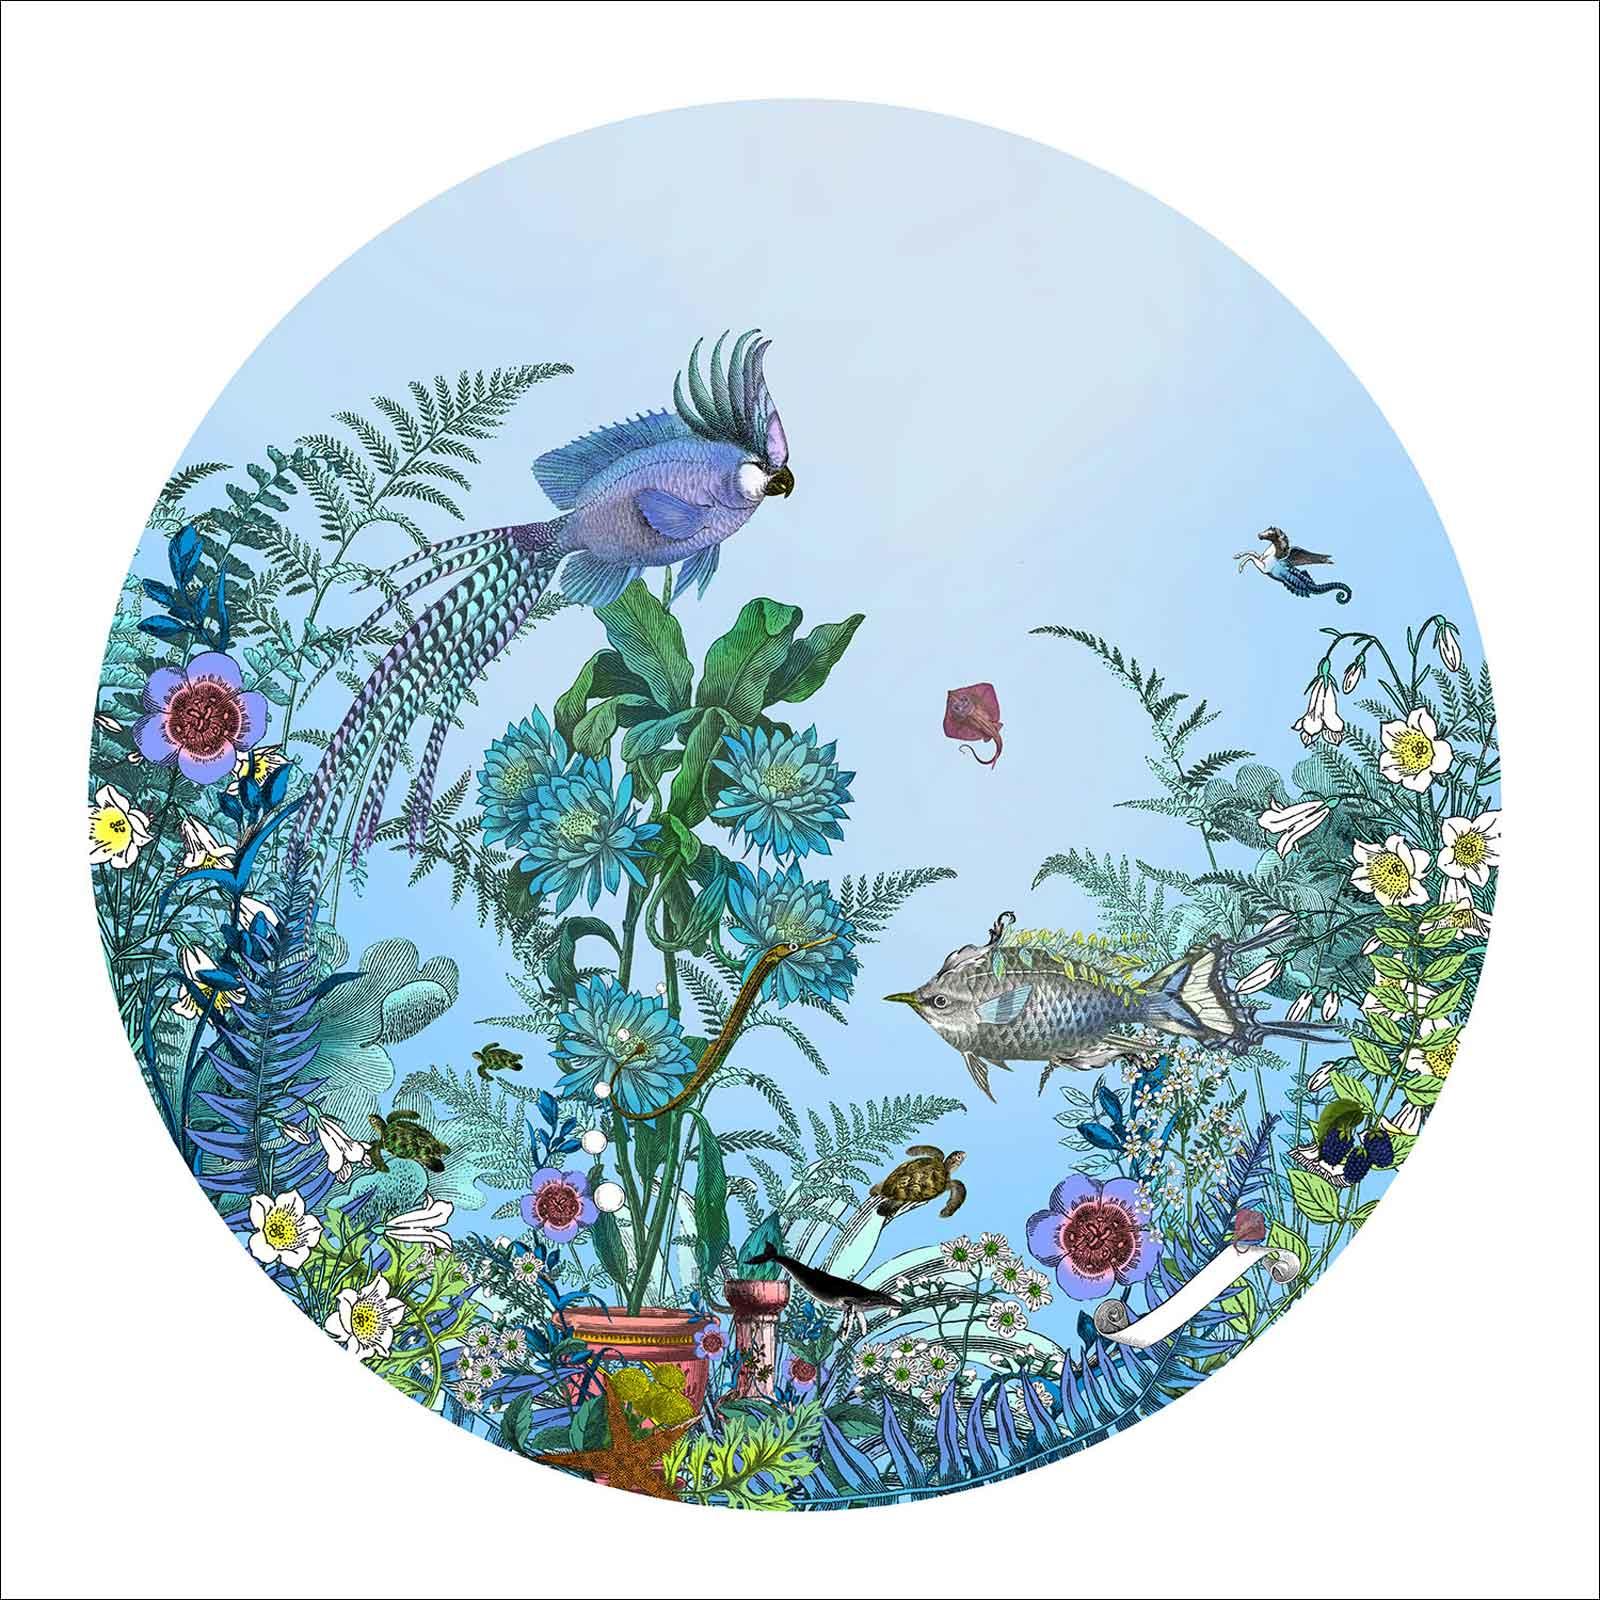 Underwater plants and fish high quality art print